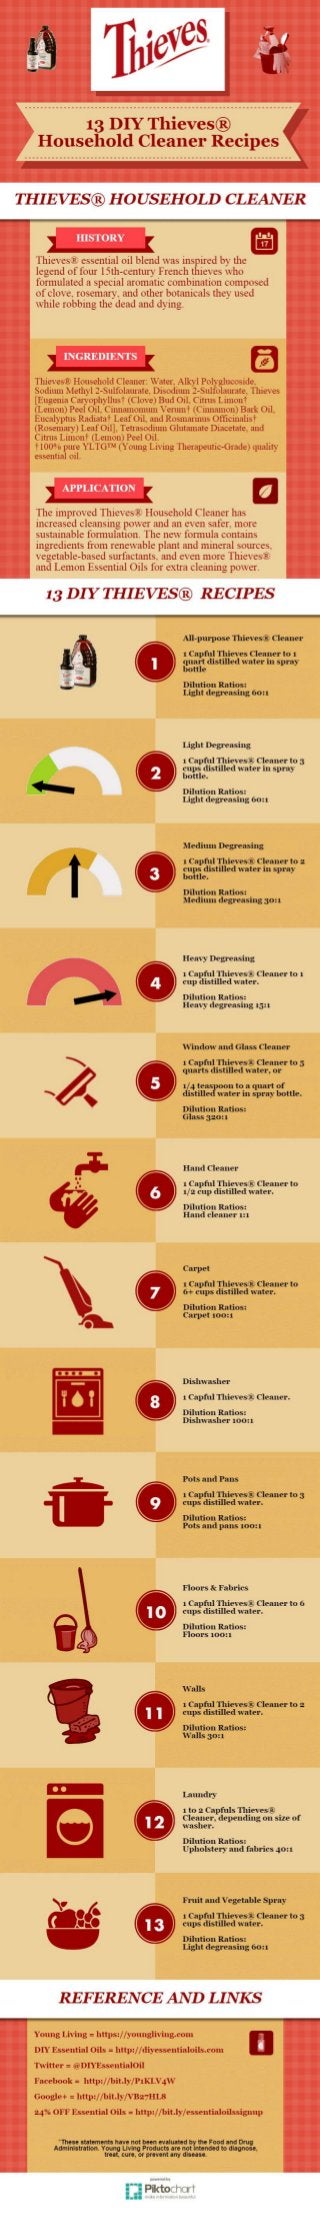 Infographic 13 DIY Thieves® Household Cleaner Recipes 